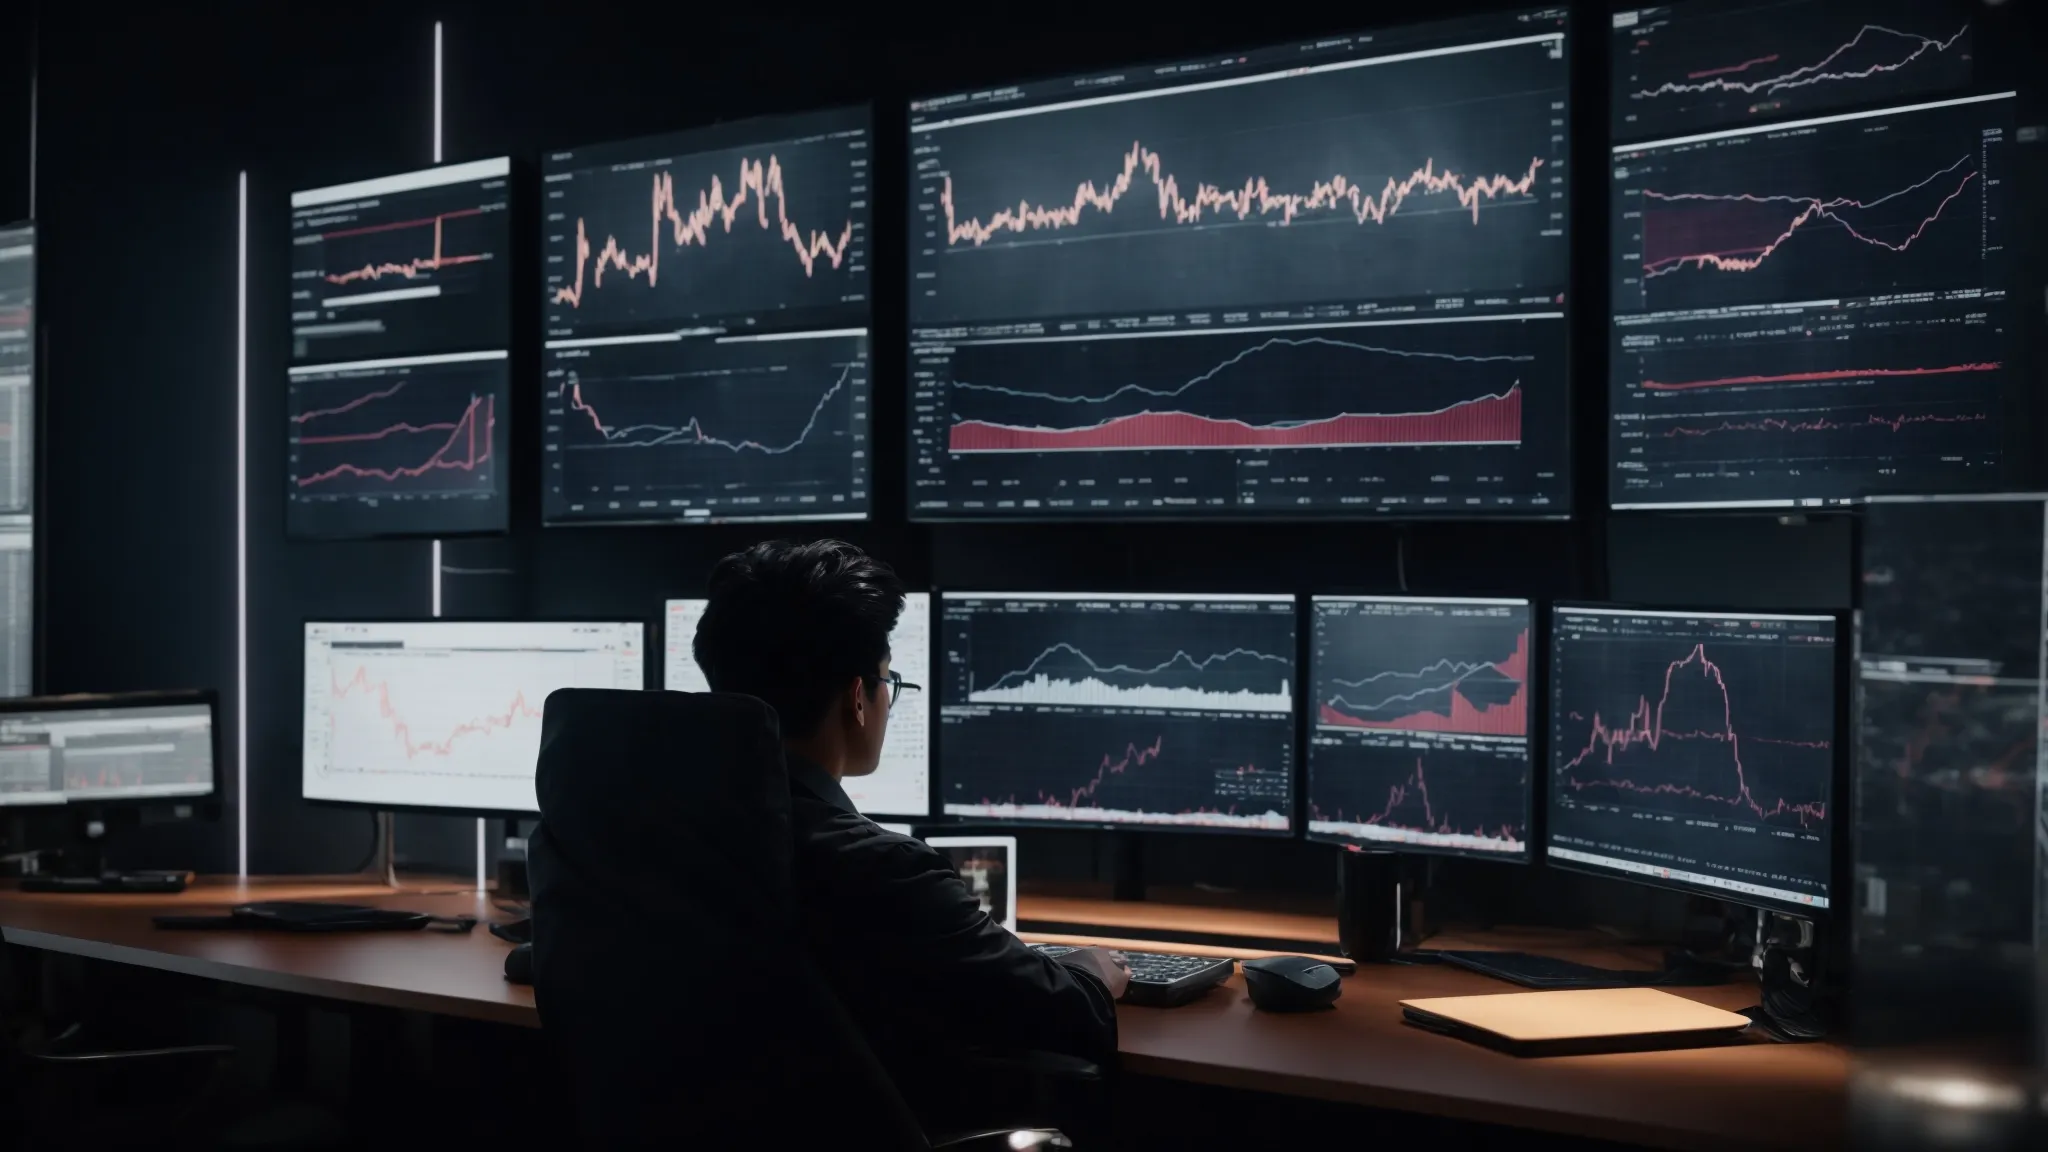 a person sitting at a desk with multiple screens displaying graphs and analytics data.